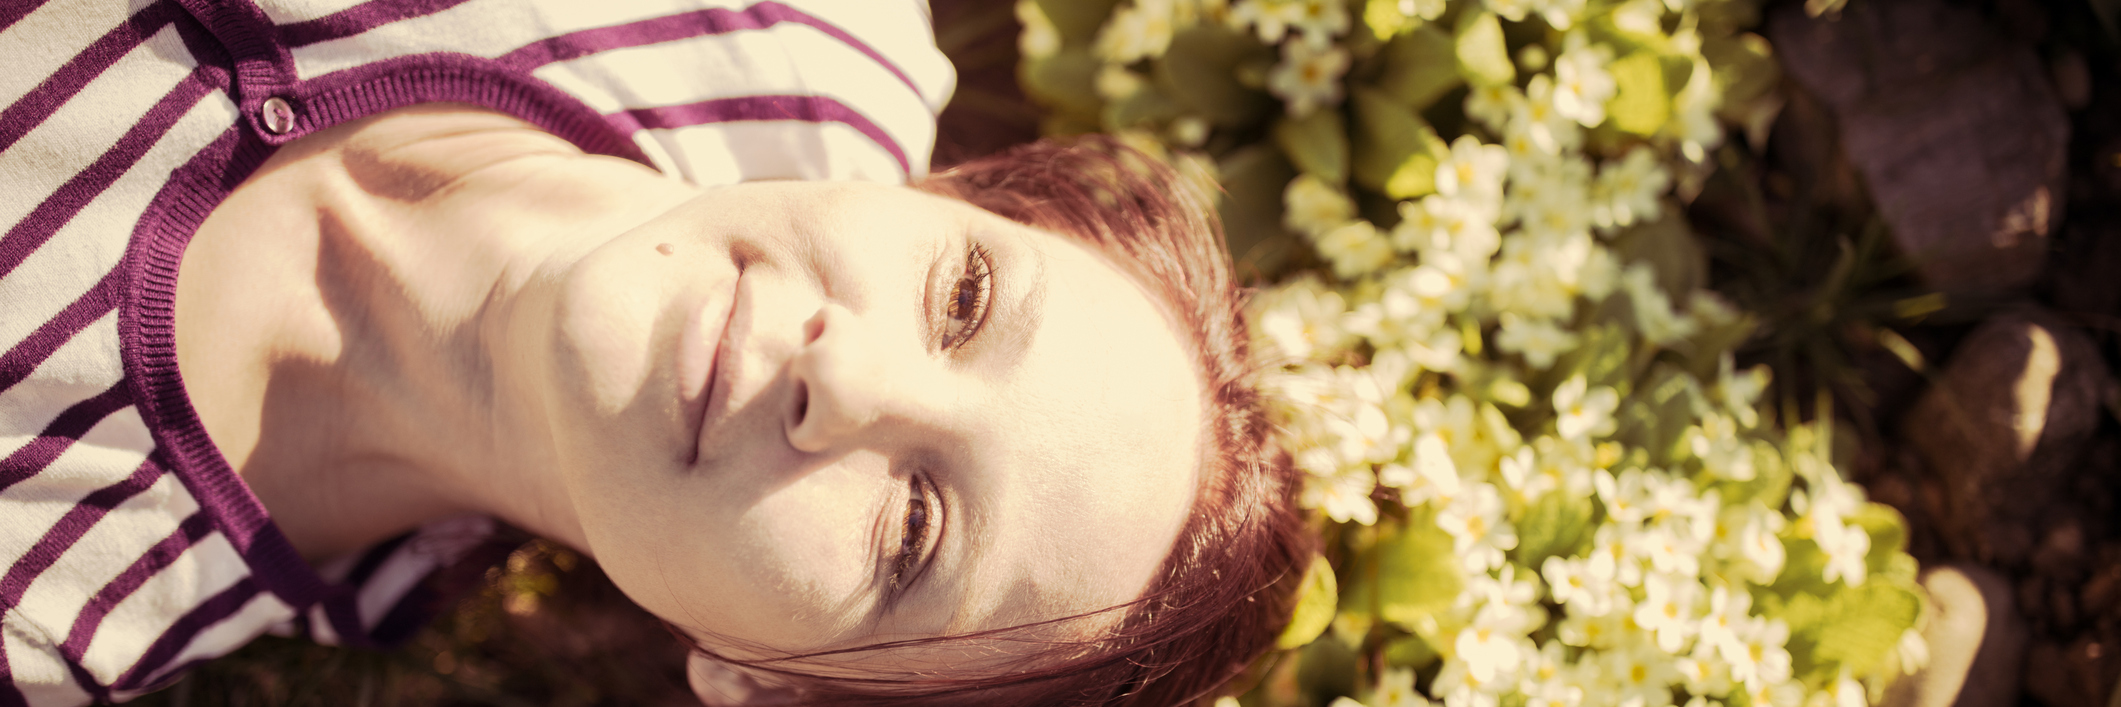 young woman lying in sunny garden looking content